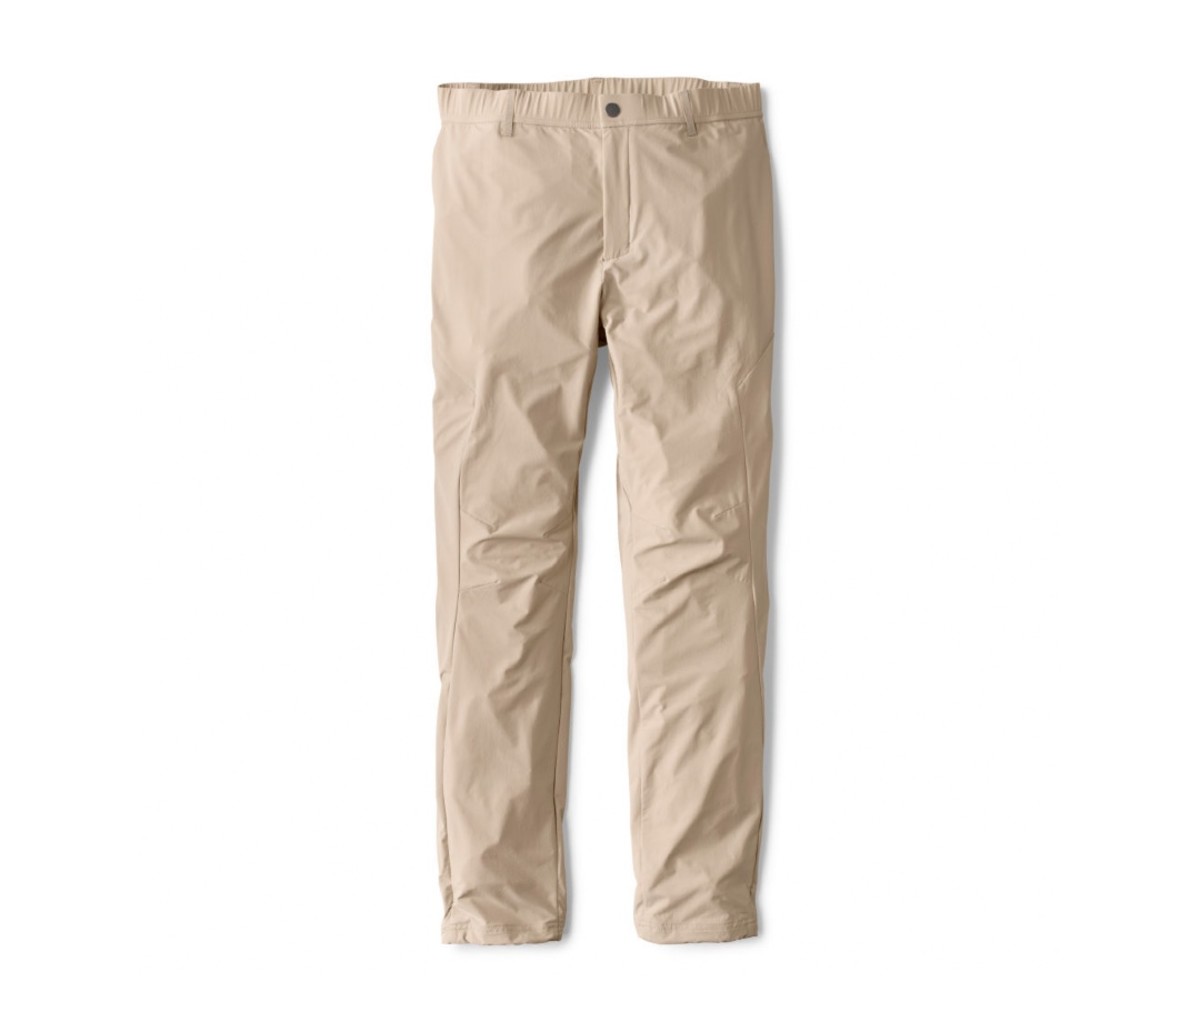 Don full-length pants with UPF protection like the Orvis Pro Sun Skiff pants to survive sunny days on the water.